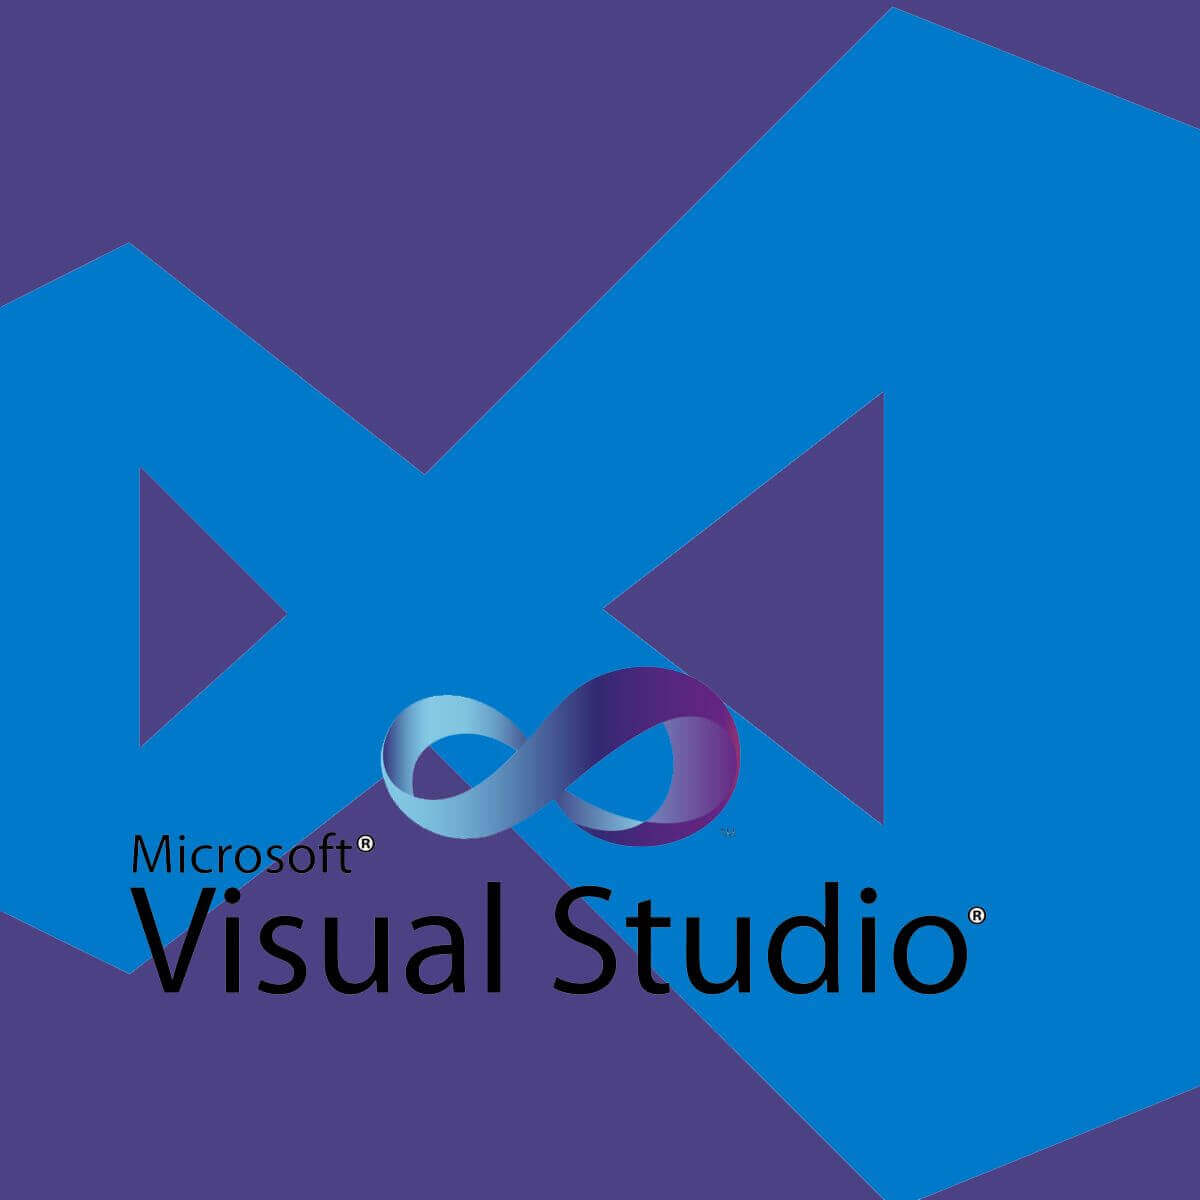 Developer PowerShell is now available in Visual Studio 2019